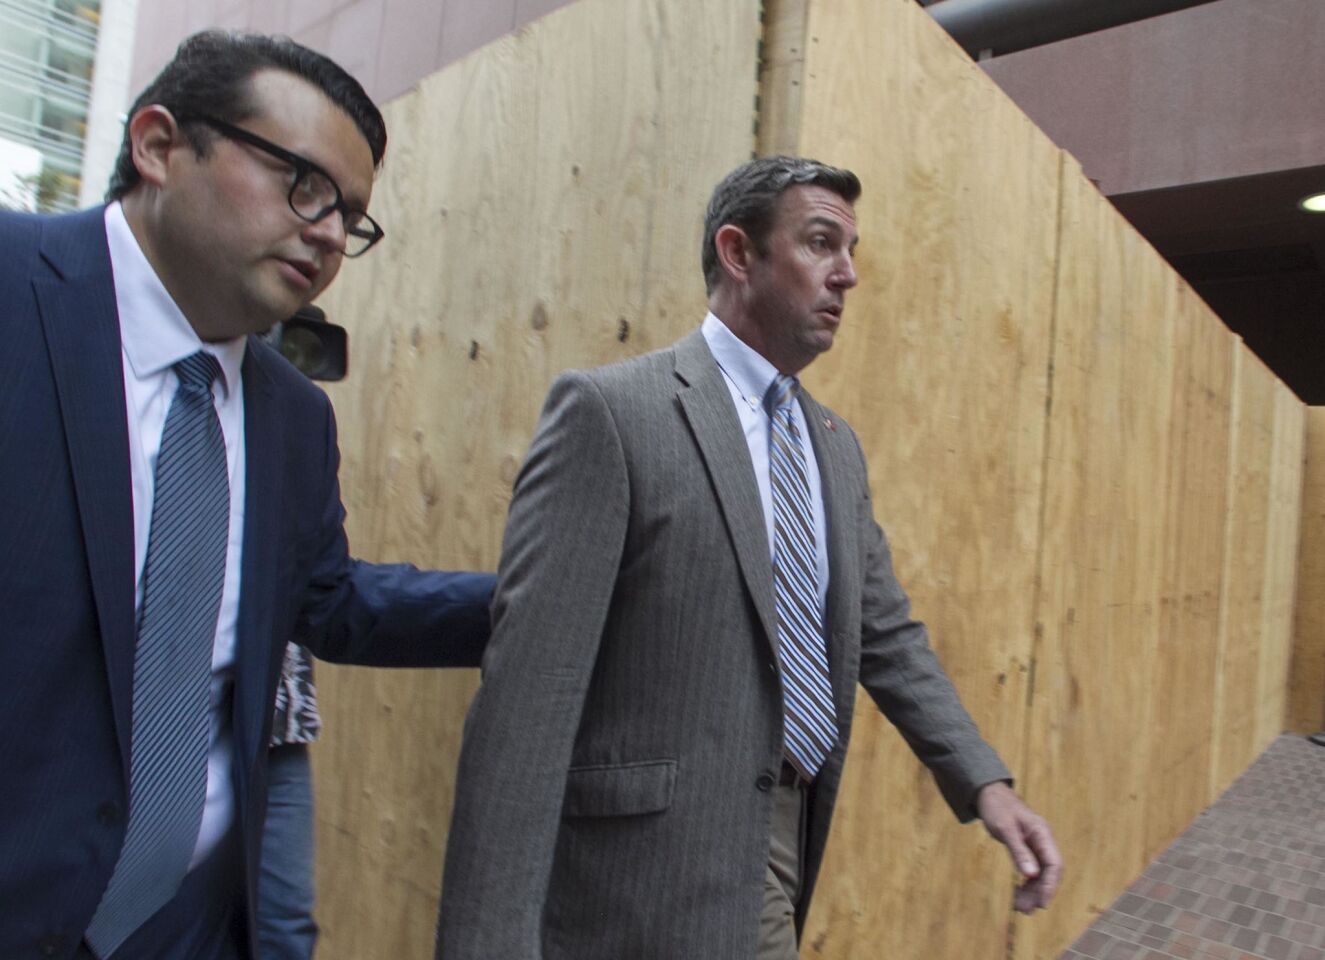 Rep. Duncan Hunter Jr., right, leaves after he appeared in Federal Court in San Diego with his attorney Gregory Vega on Monday, Sept. 24 for a status hearing on his case.